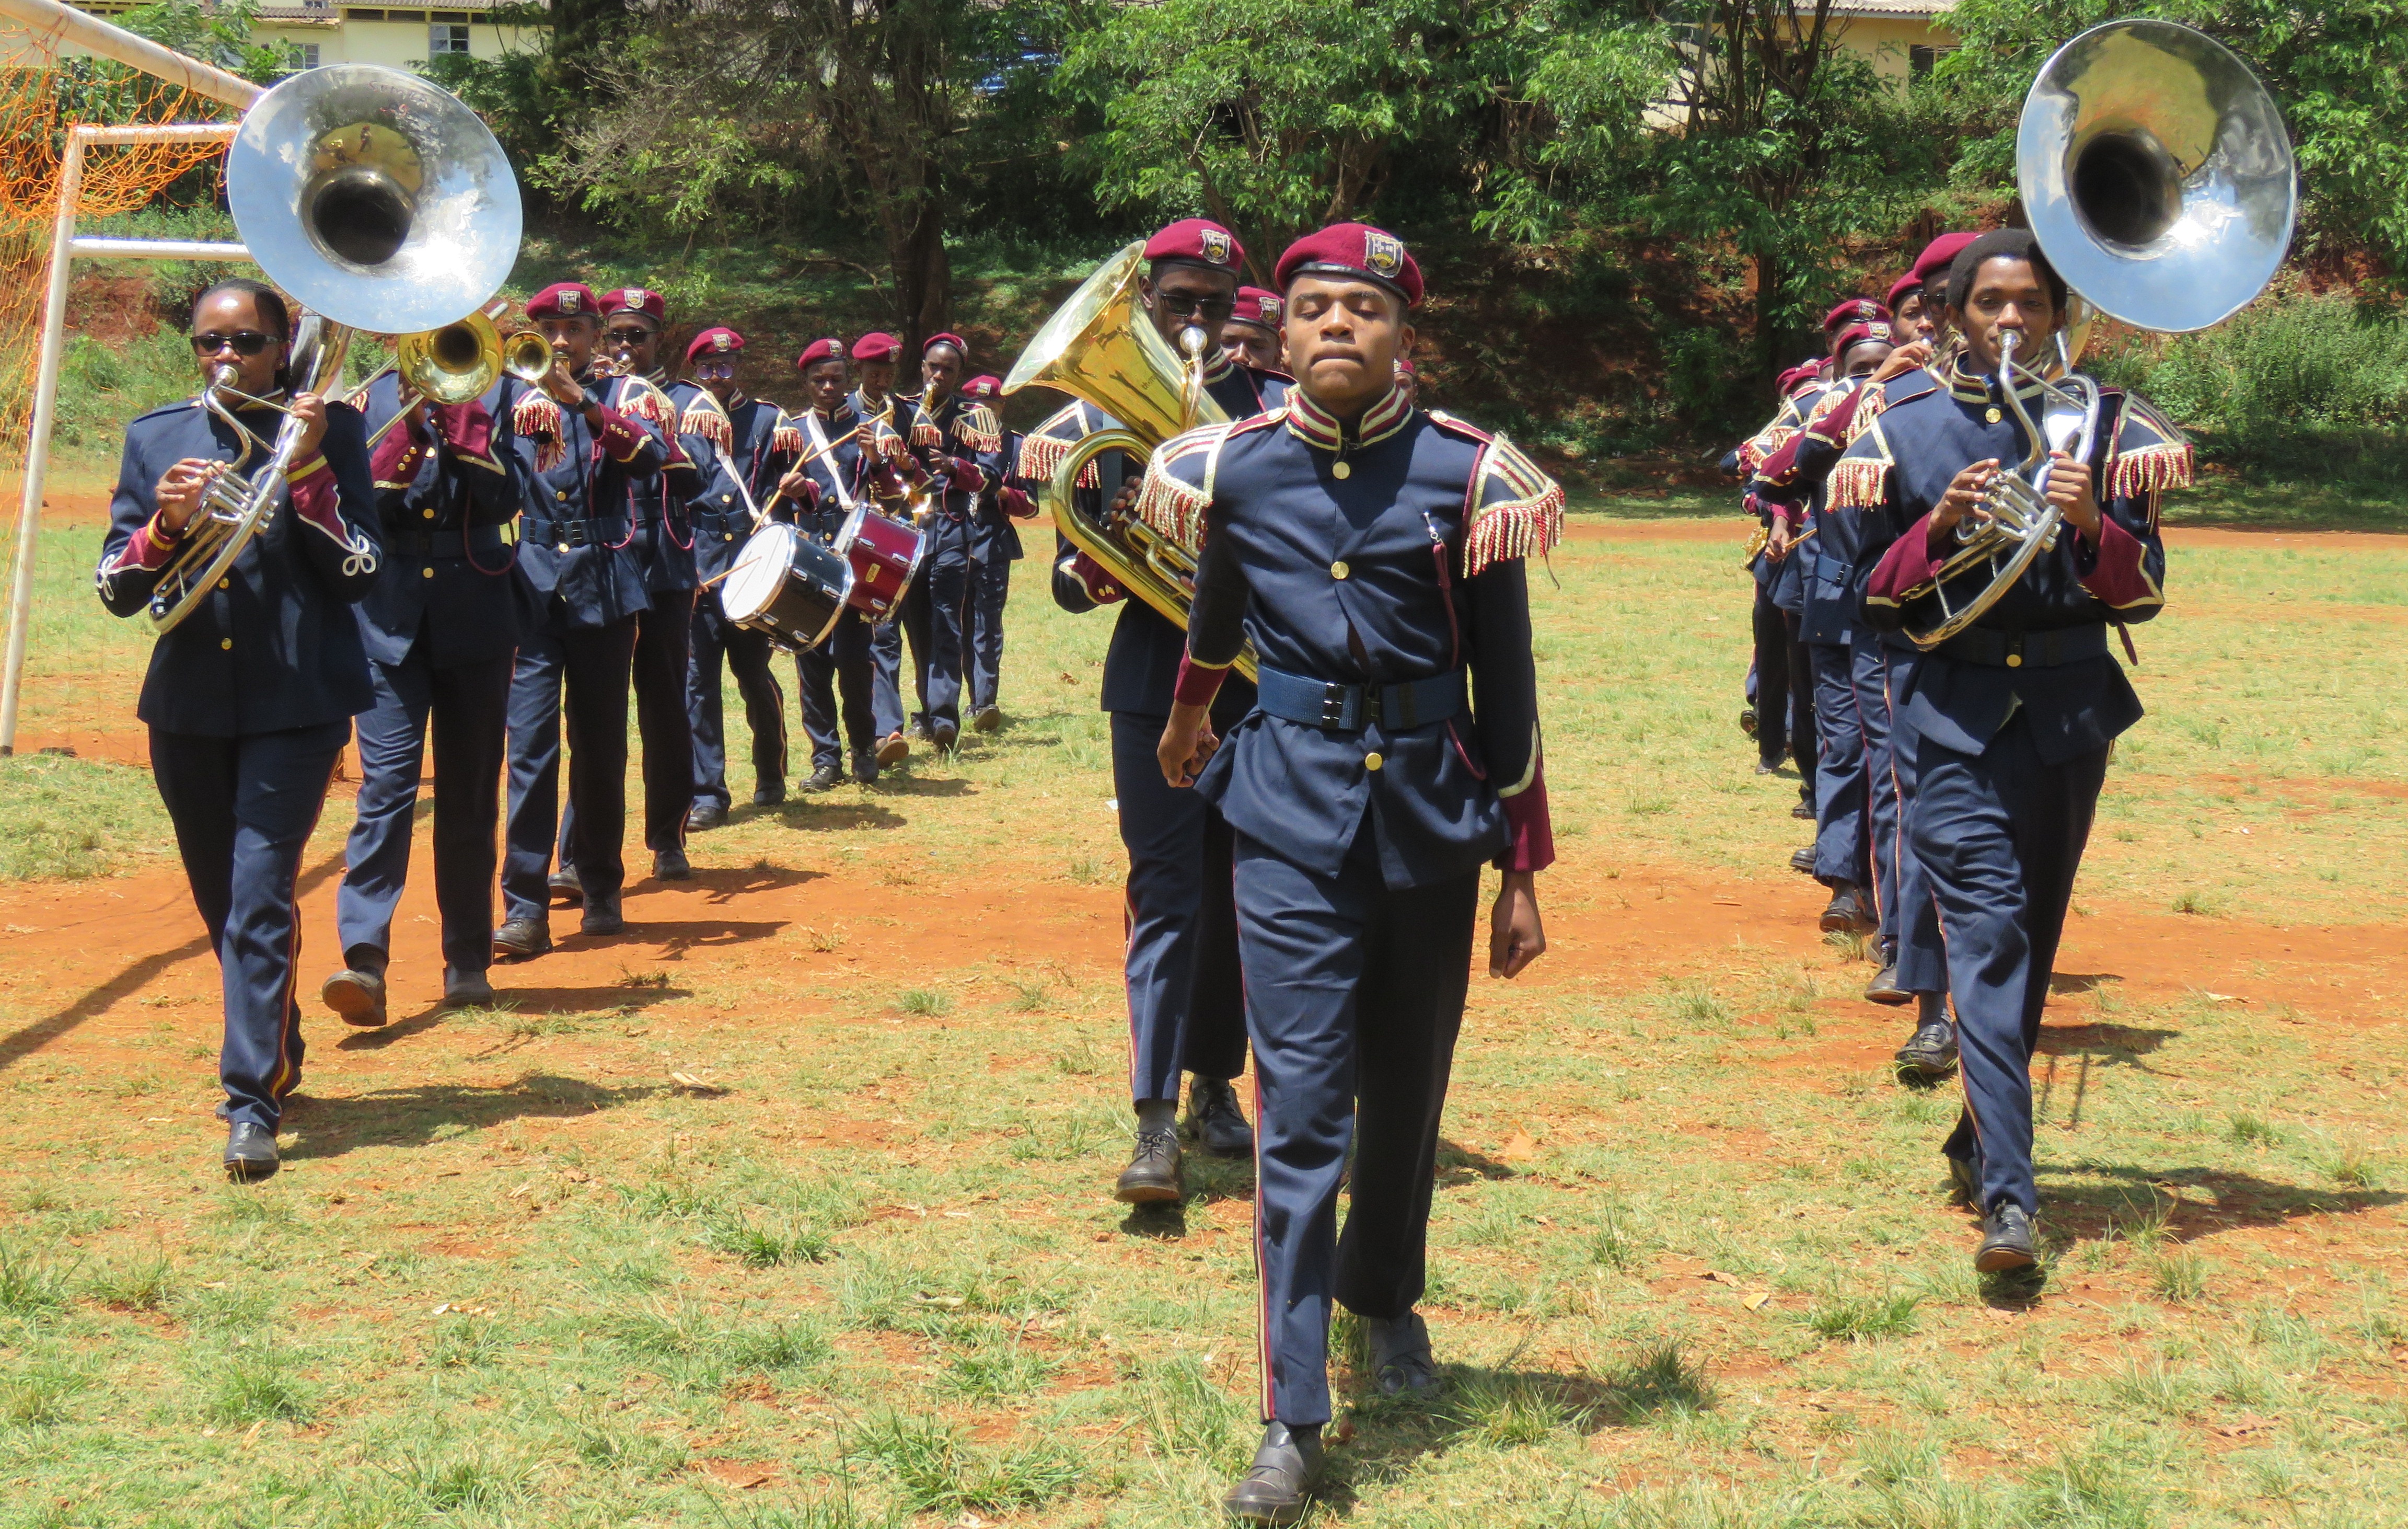 This School Band is one of the Best Bands in Central Region.
It was unveiled in 2018 and since then, it has established itself at number one in playing some of the best songs and melodies.